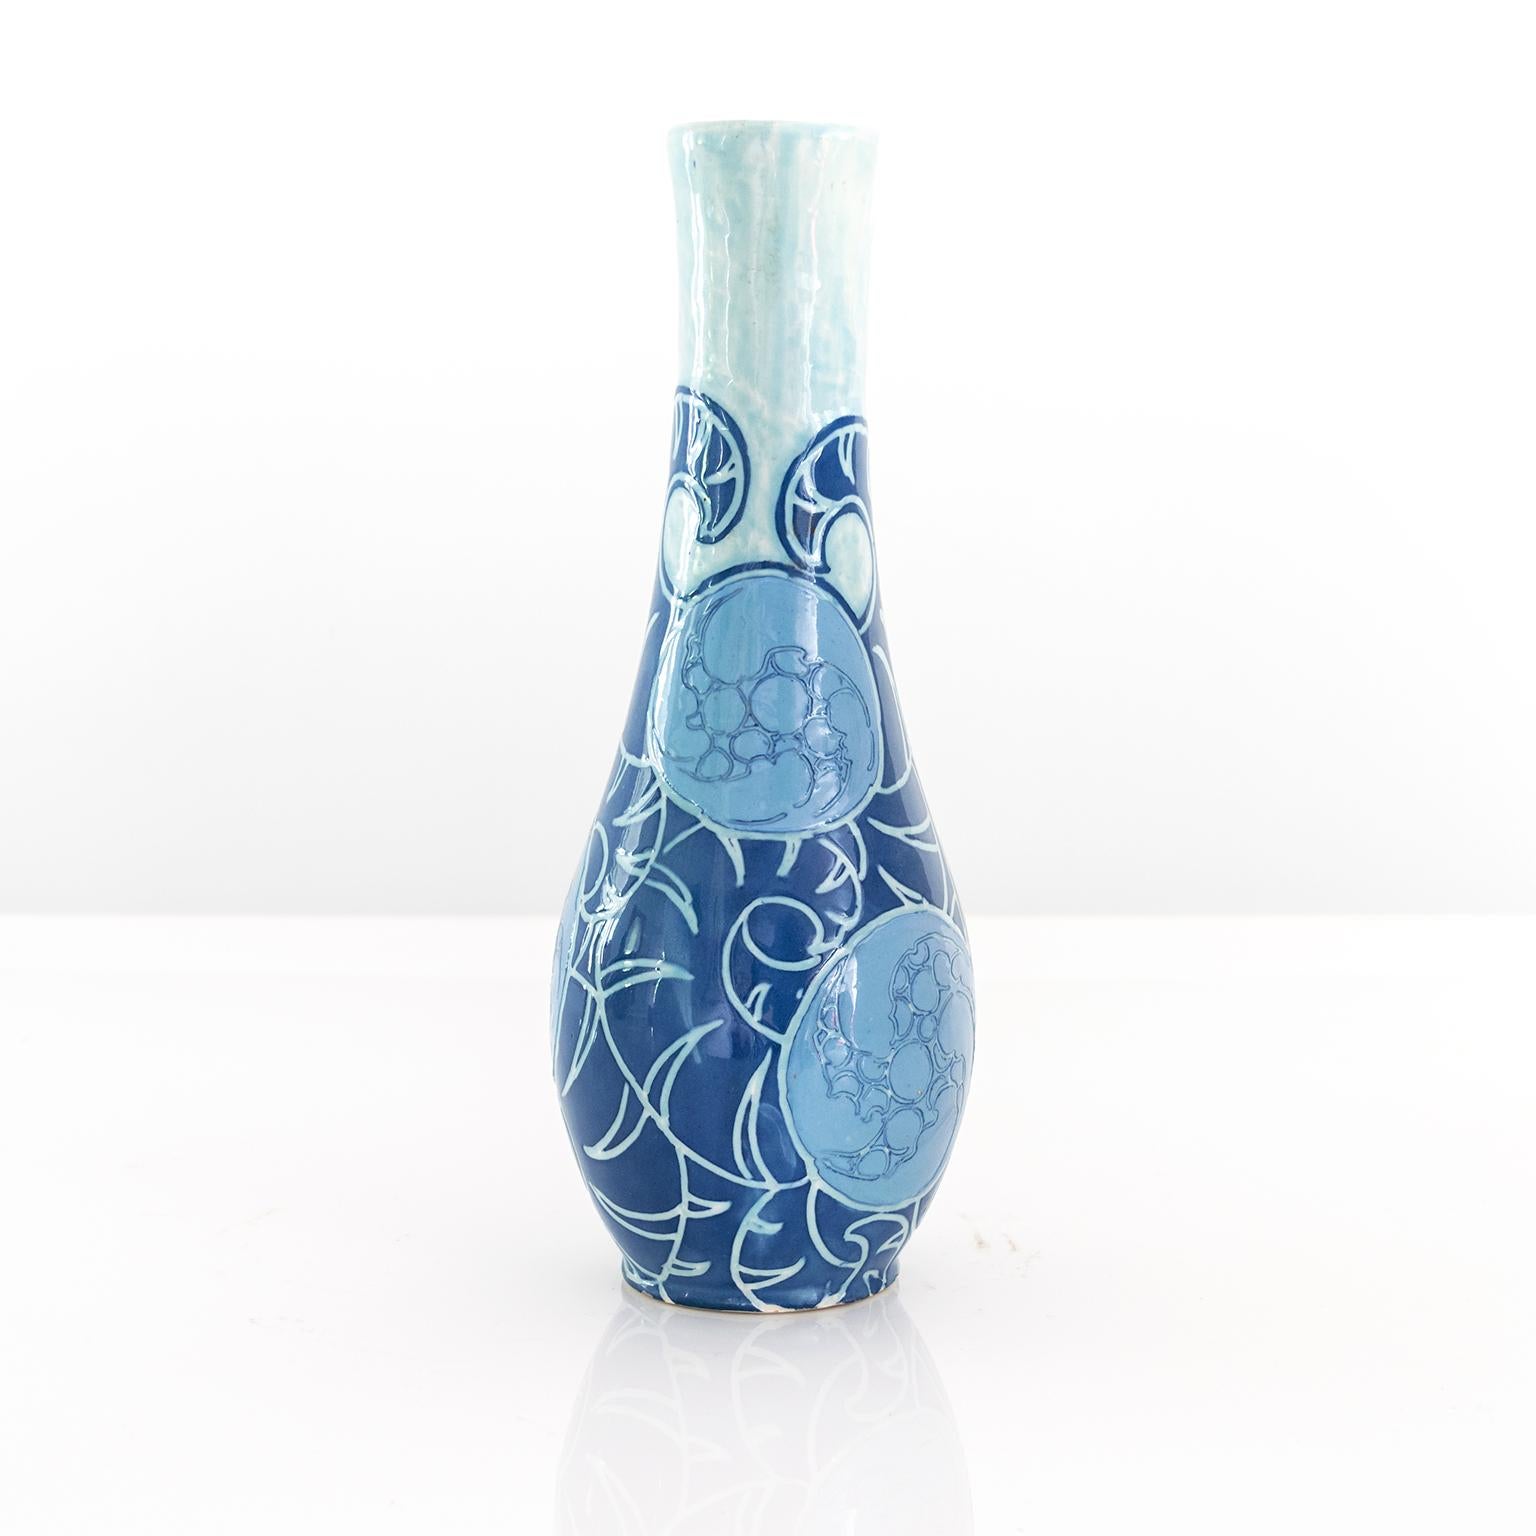 A Swedish Art Nouveau sgraffito vase in blues designed by Gunnar Wennerberg for Gustavsberg, 1905.

Measures: Height: 11”.